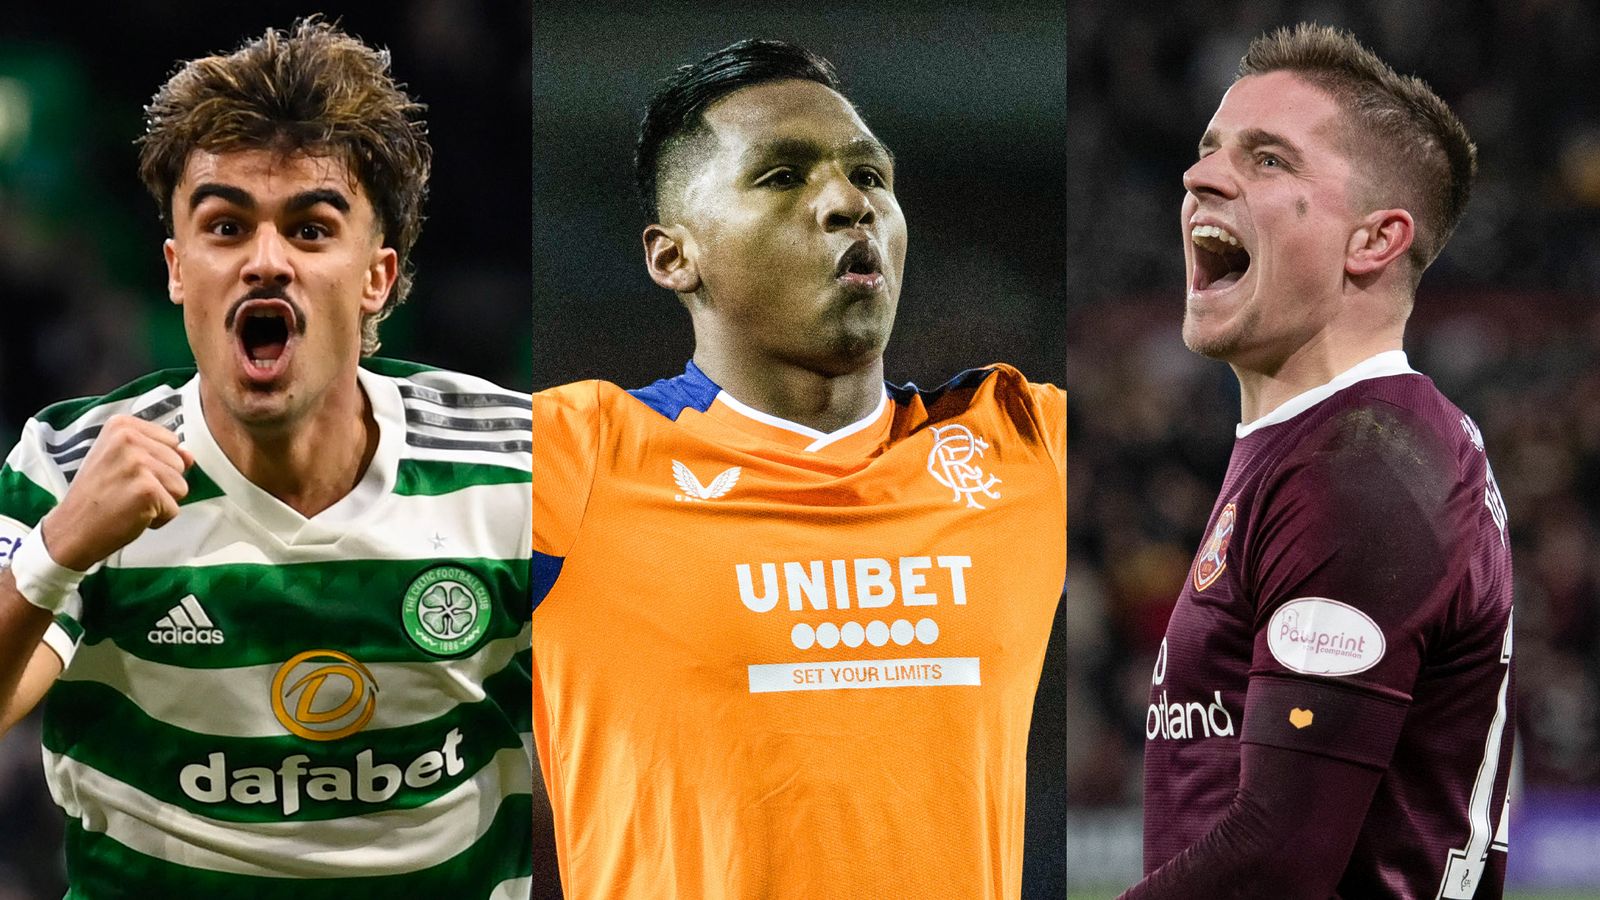 skysports spfl team of the week 6029092 Scottish Premiership: Celtic, Rangers and Hearts function in Group of